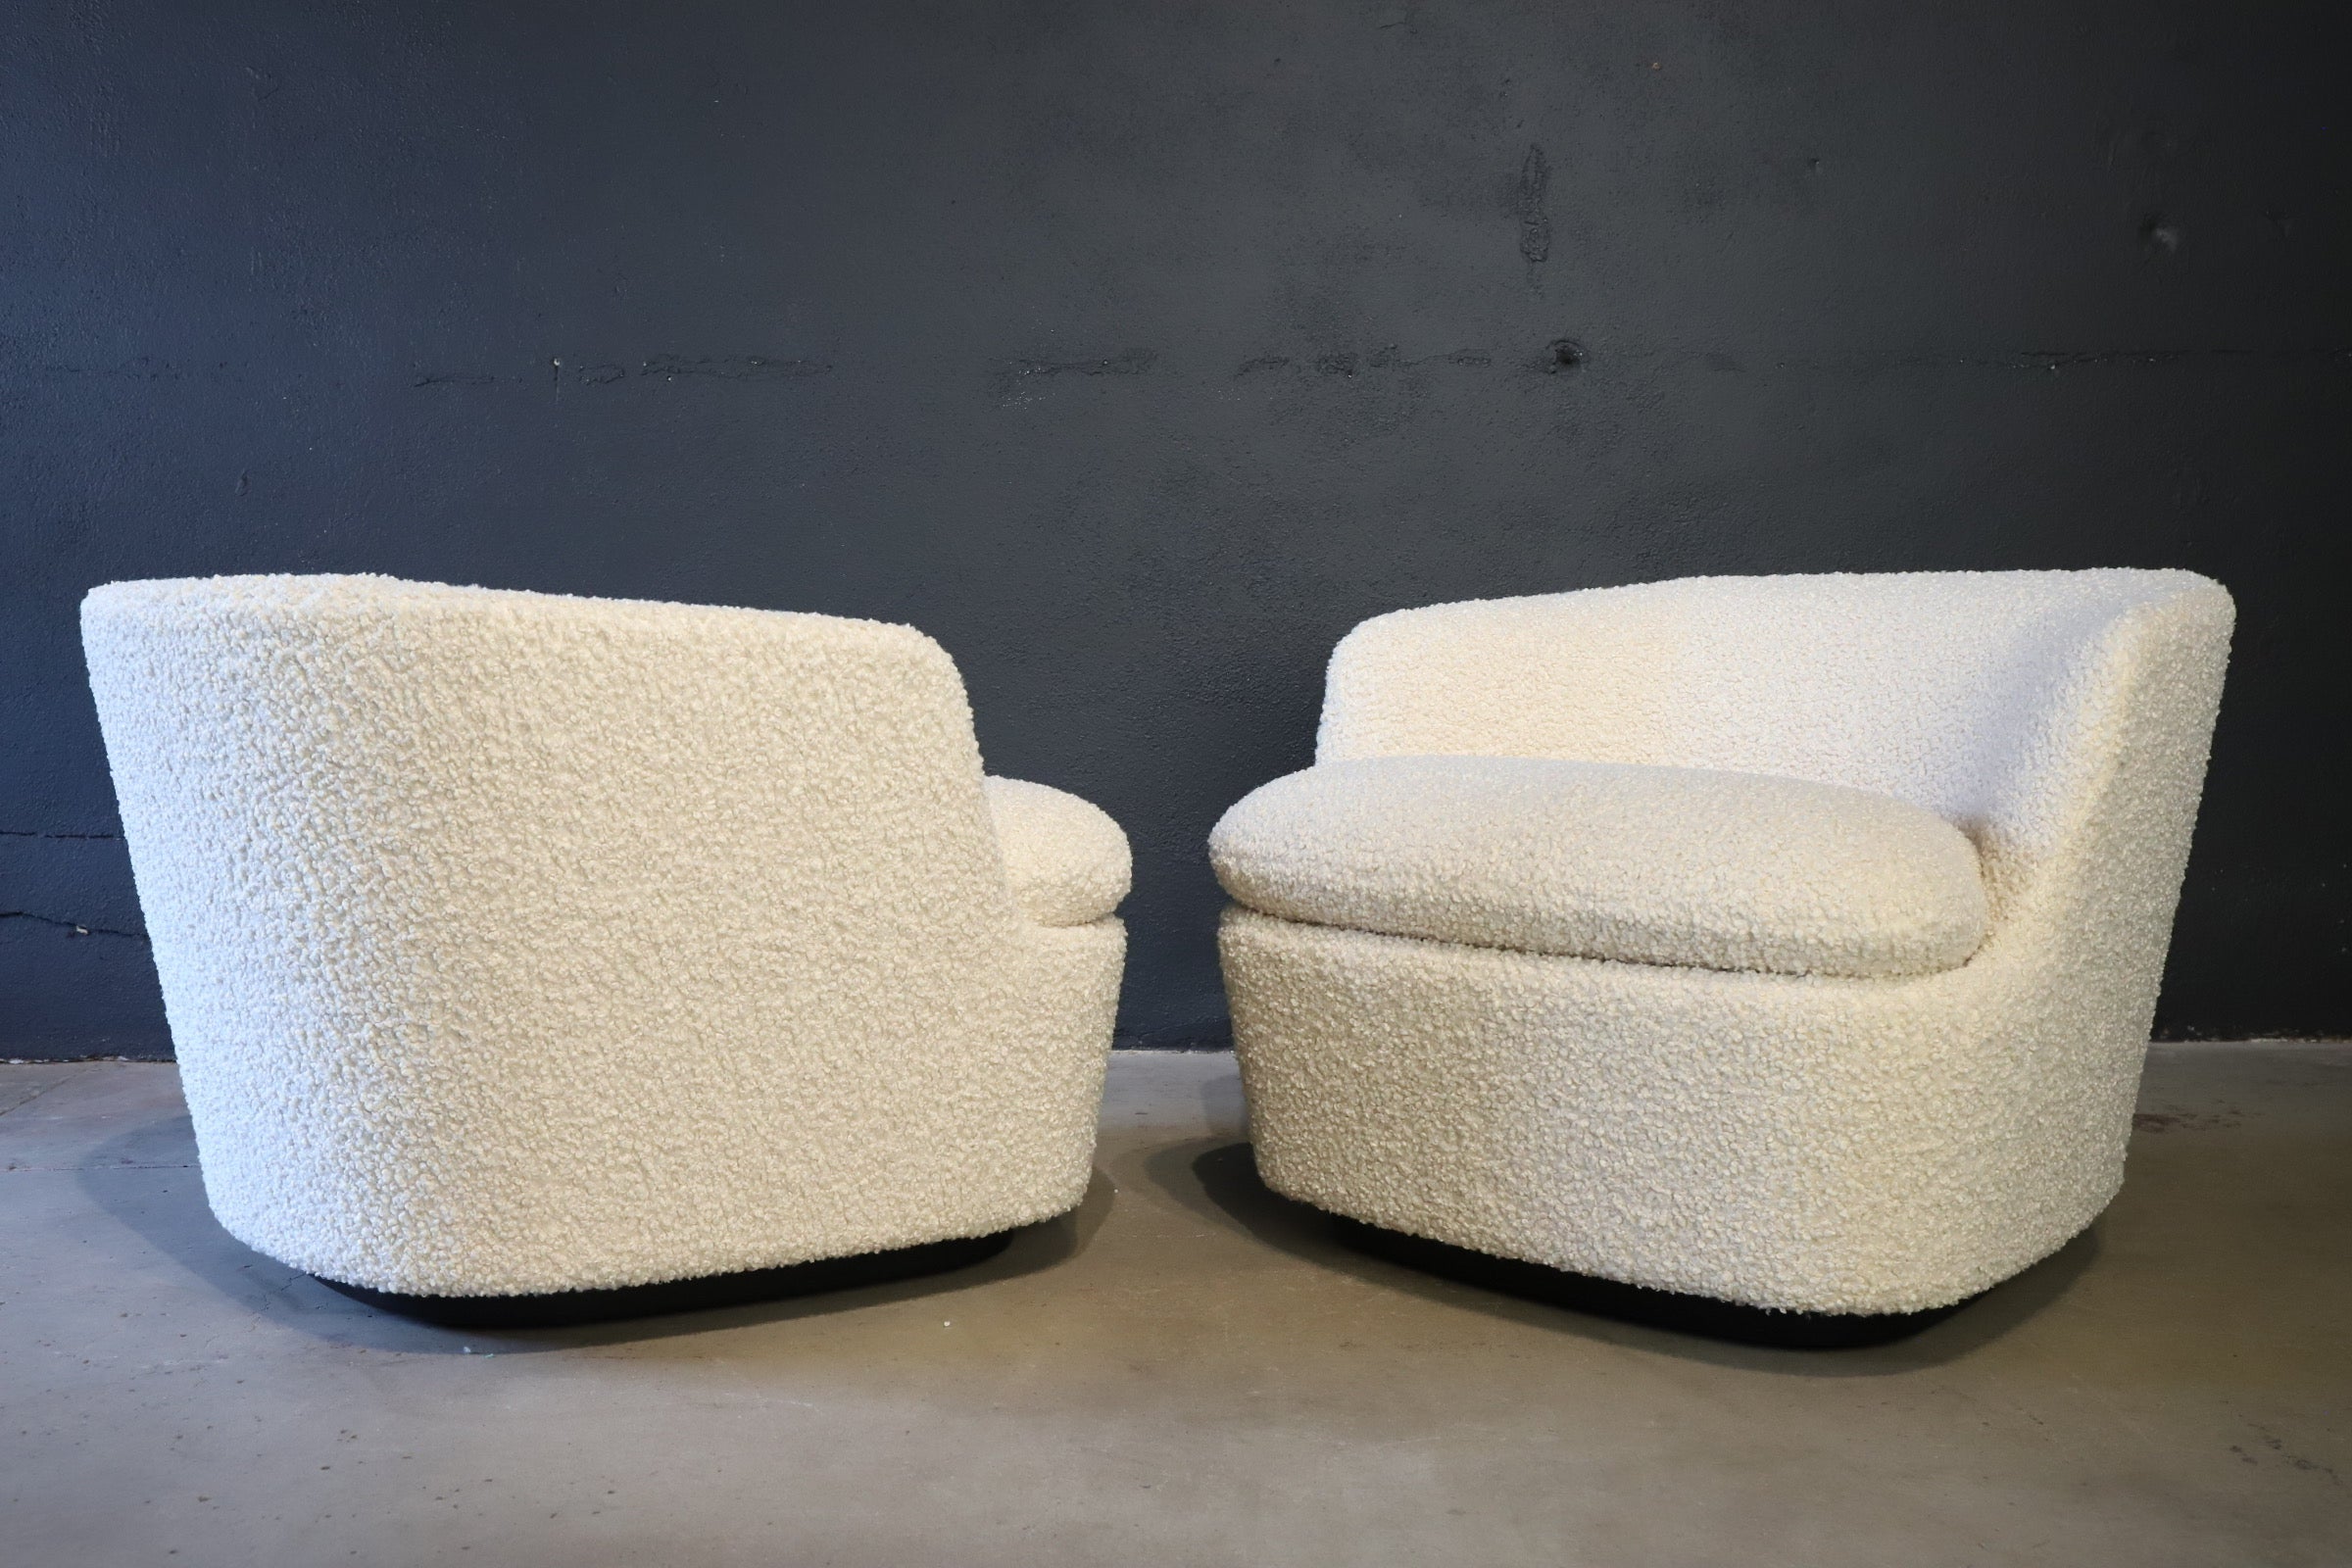 Stunning modern and contemporary stylish lounge chairs by Jasper Morrison for Cappellini. Custom nubby upholstery makes the chairs feel like a gentle soft hug while seated. Both chairs feature a 360 degree swivel. Chairs photographed with waterfall